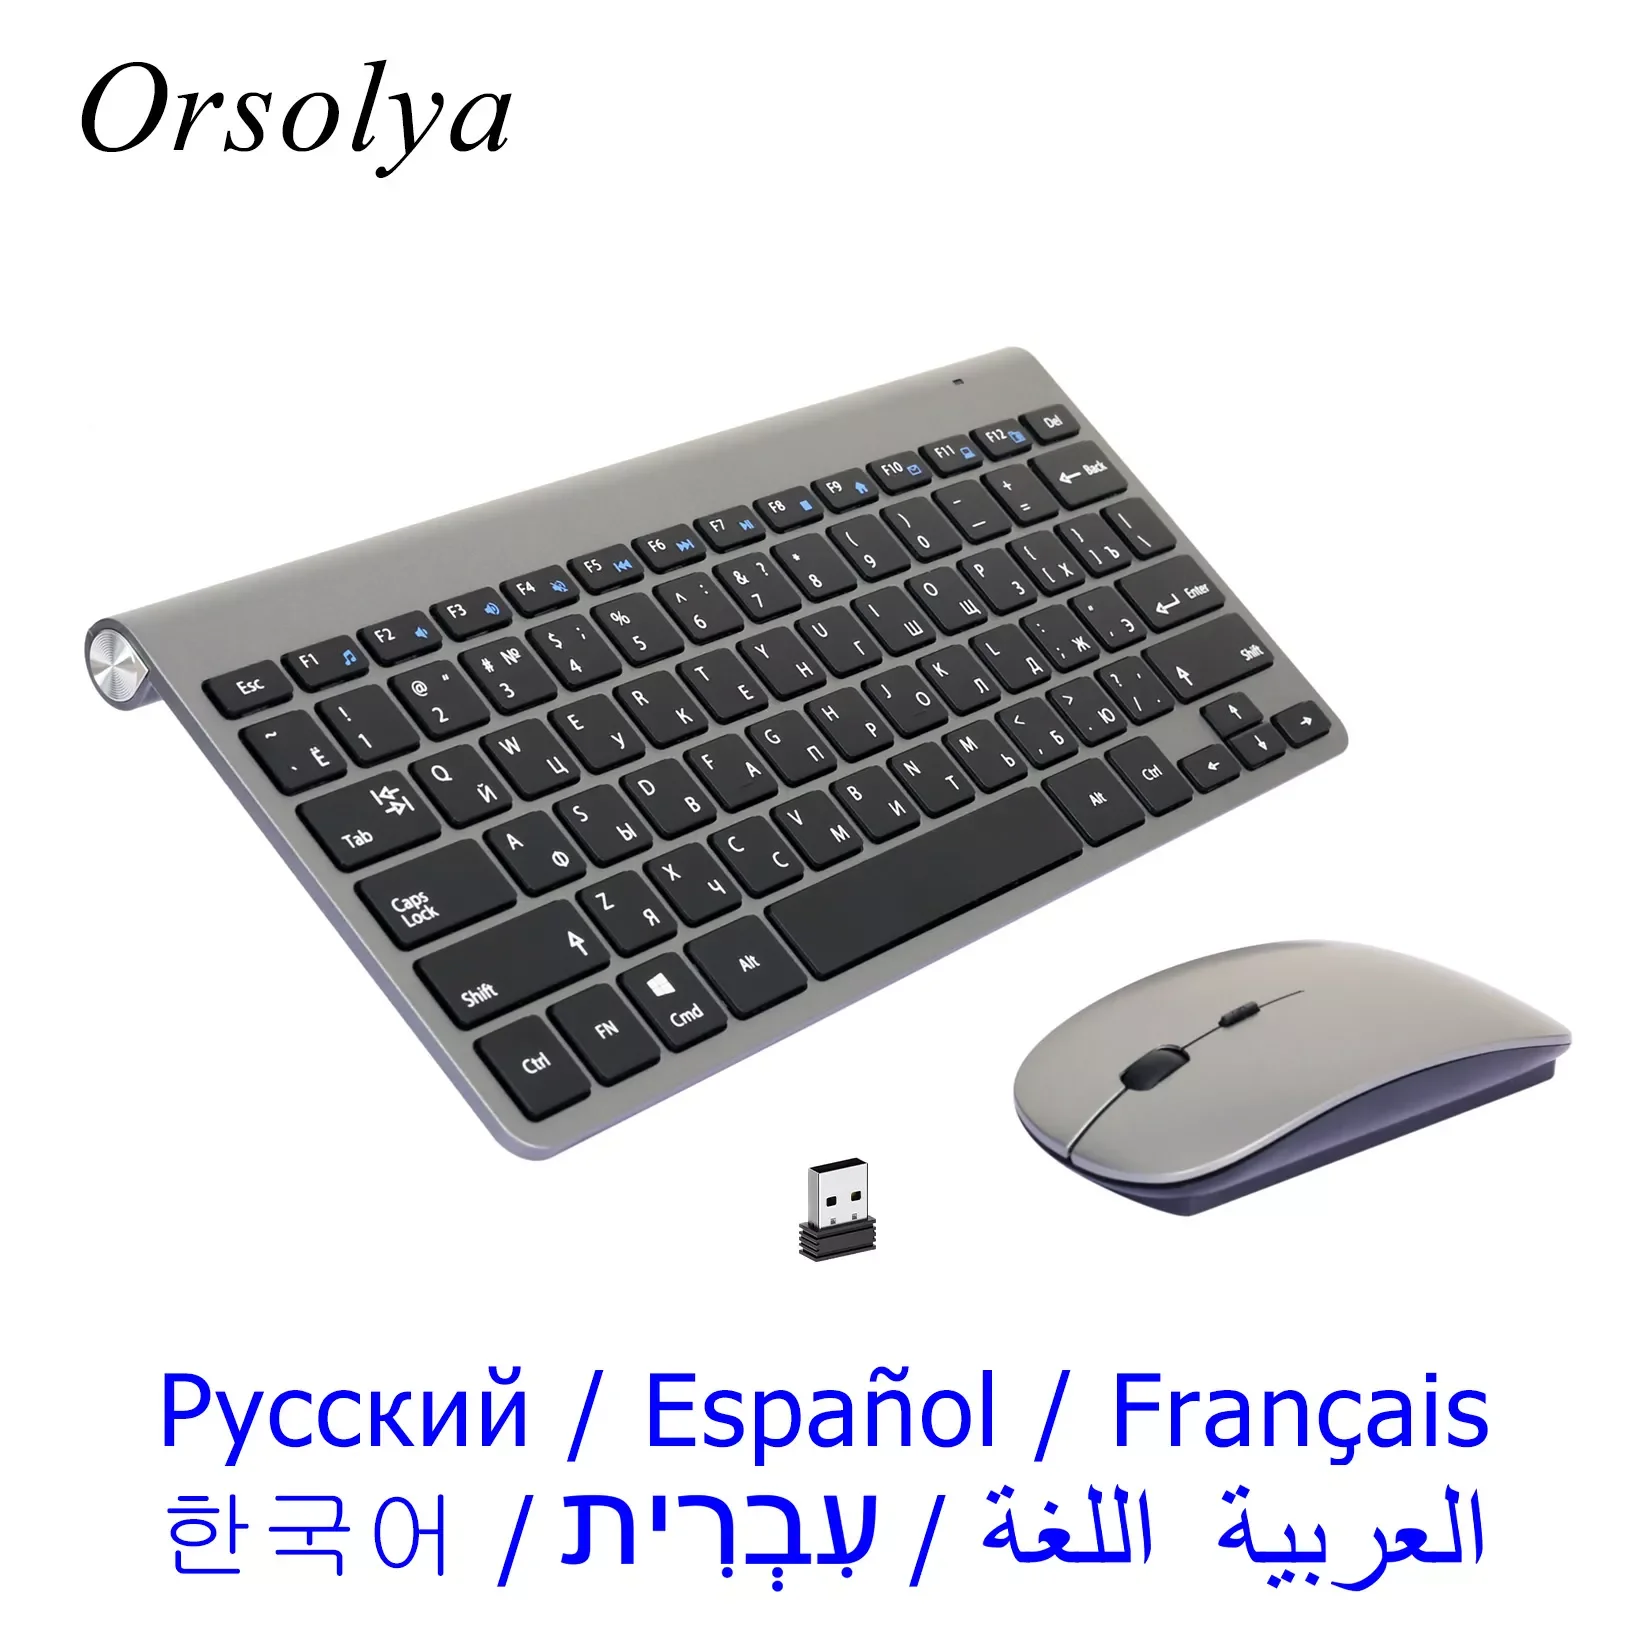 

2.4G Wireless Keyboard and Mouse Combo Ultra Thin Russian/Spanish/French/Arabic/Hebrew Protable Mini Keyboard Mice for Laptop PC